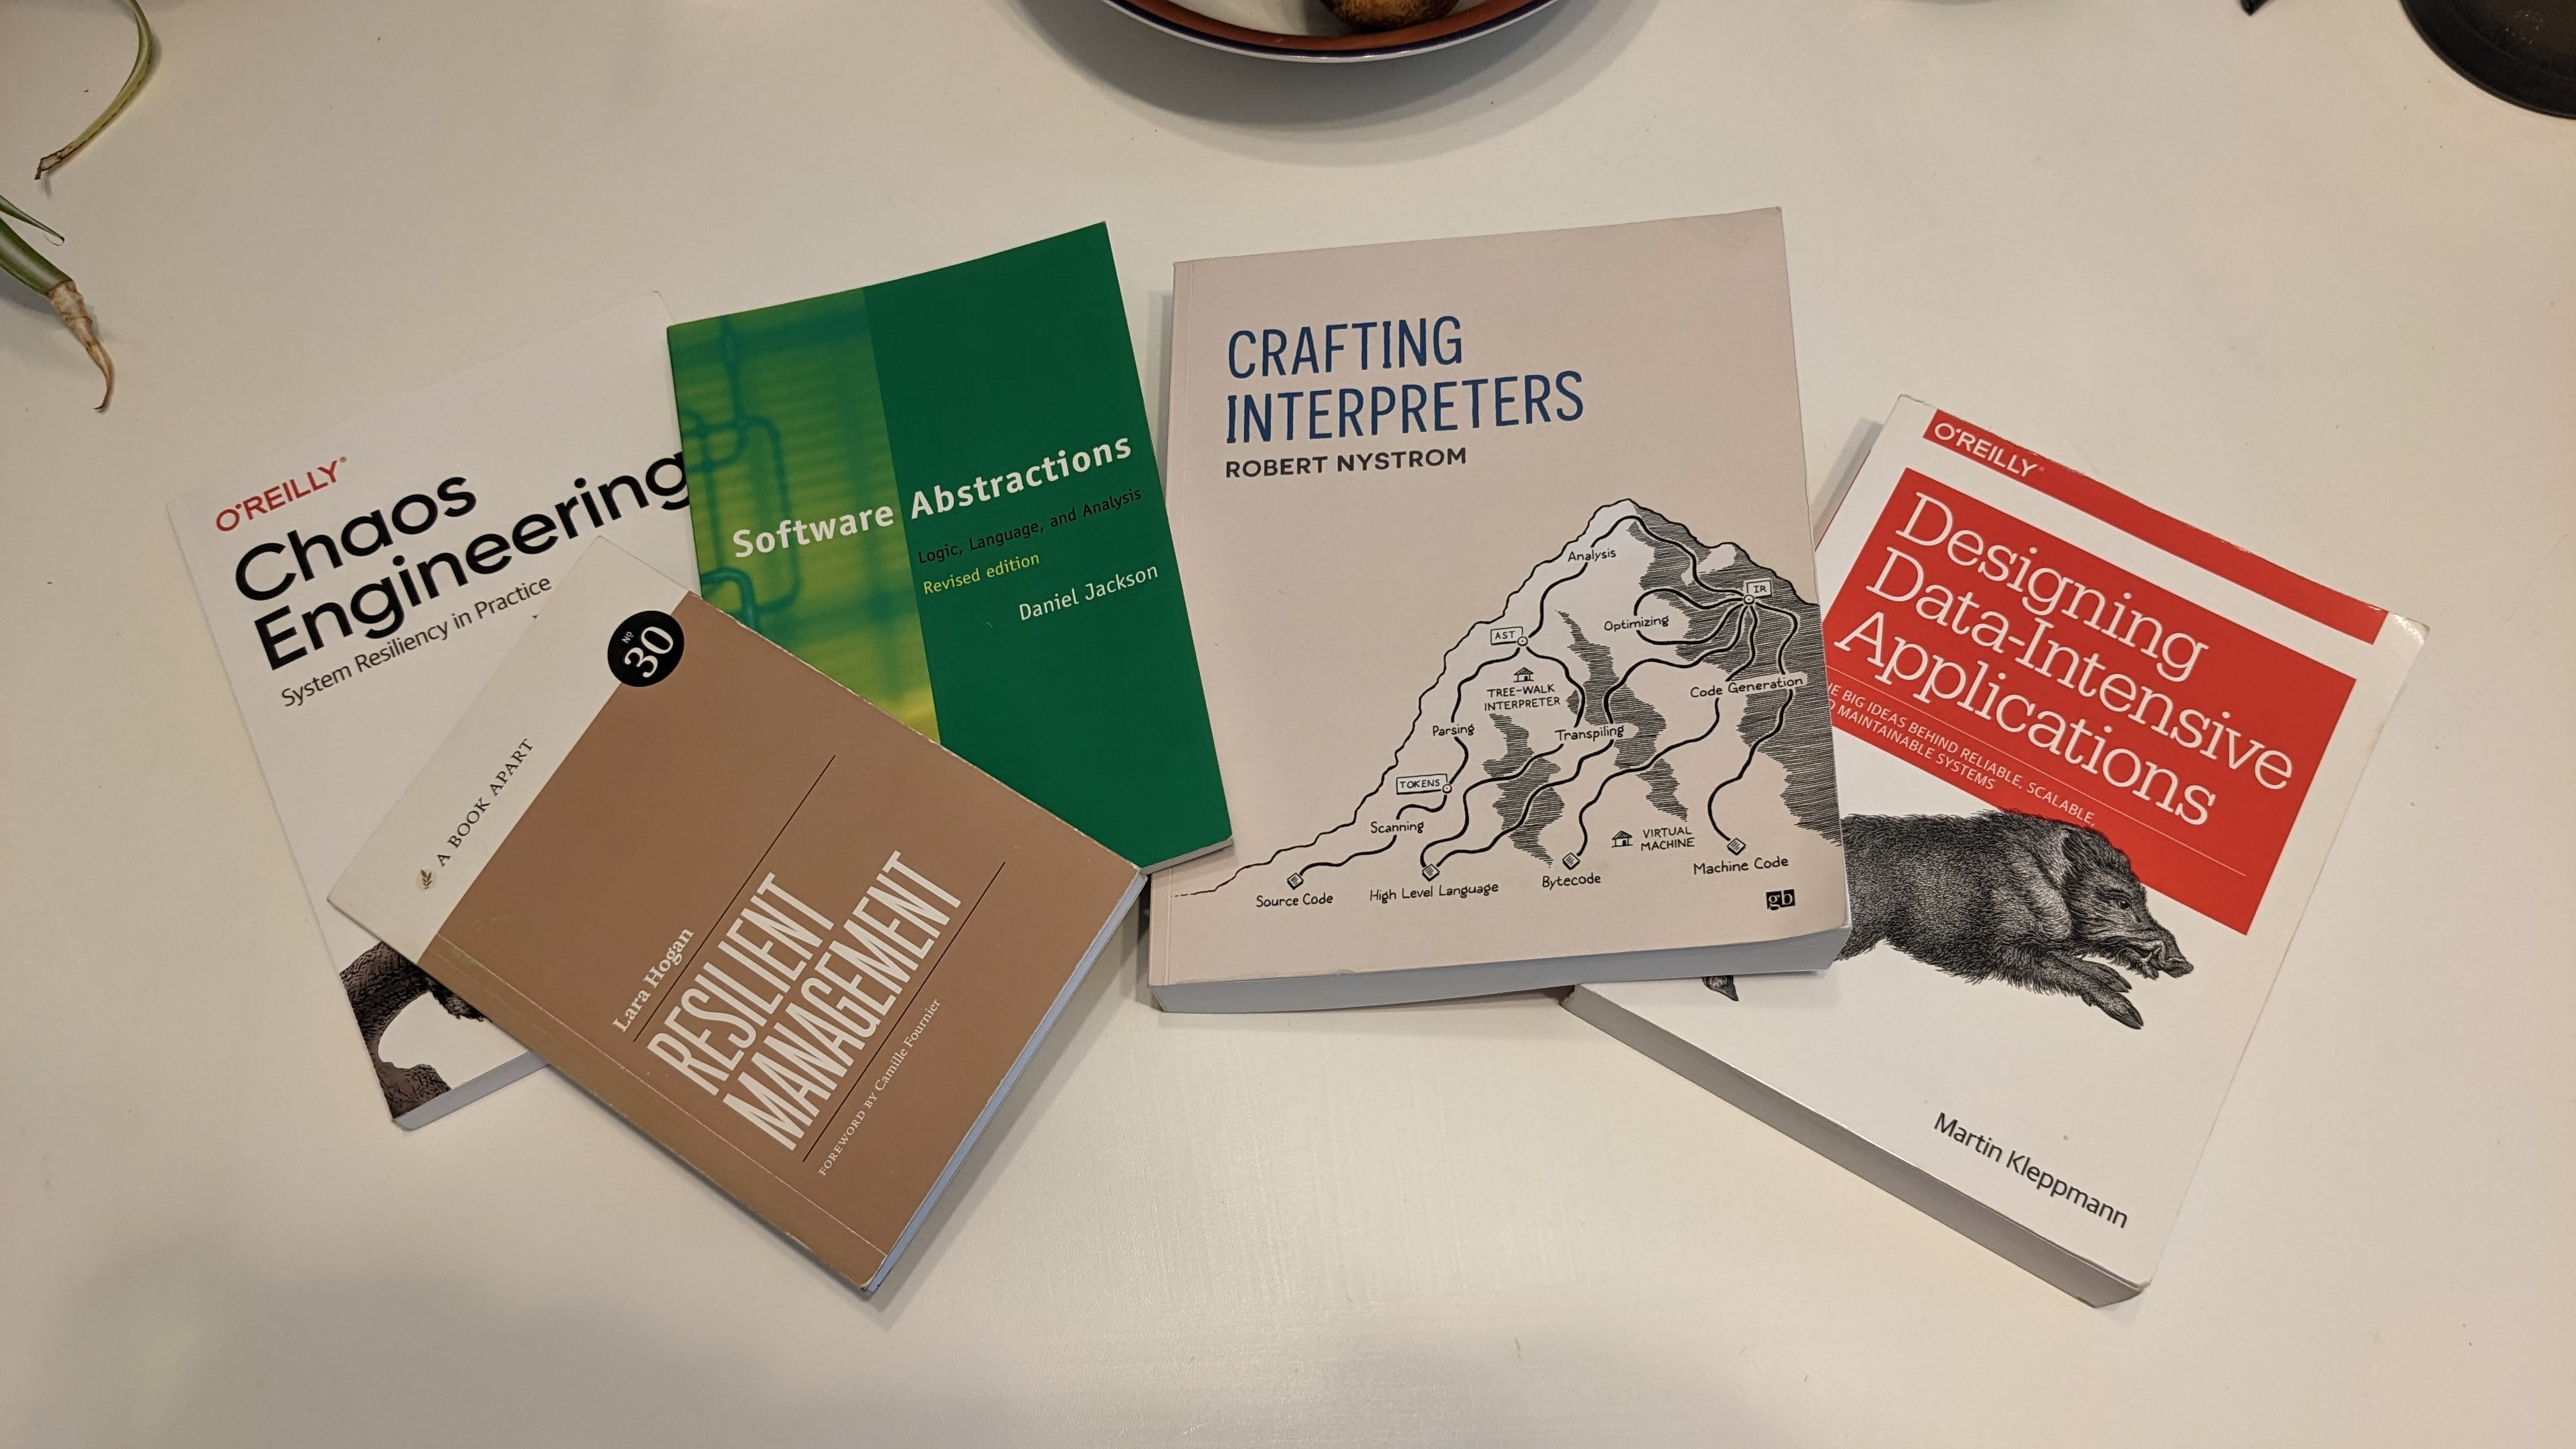 Les cinqs livres: Chaos Engineering System Resiliency in Practice, Resilient Management, Crafting Interpreters, Software Abstractions, Designing Data-Intensive Applications